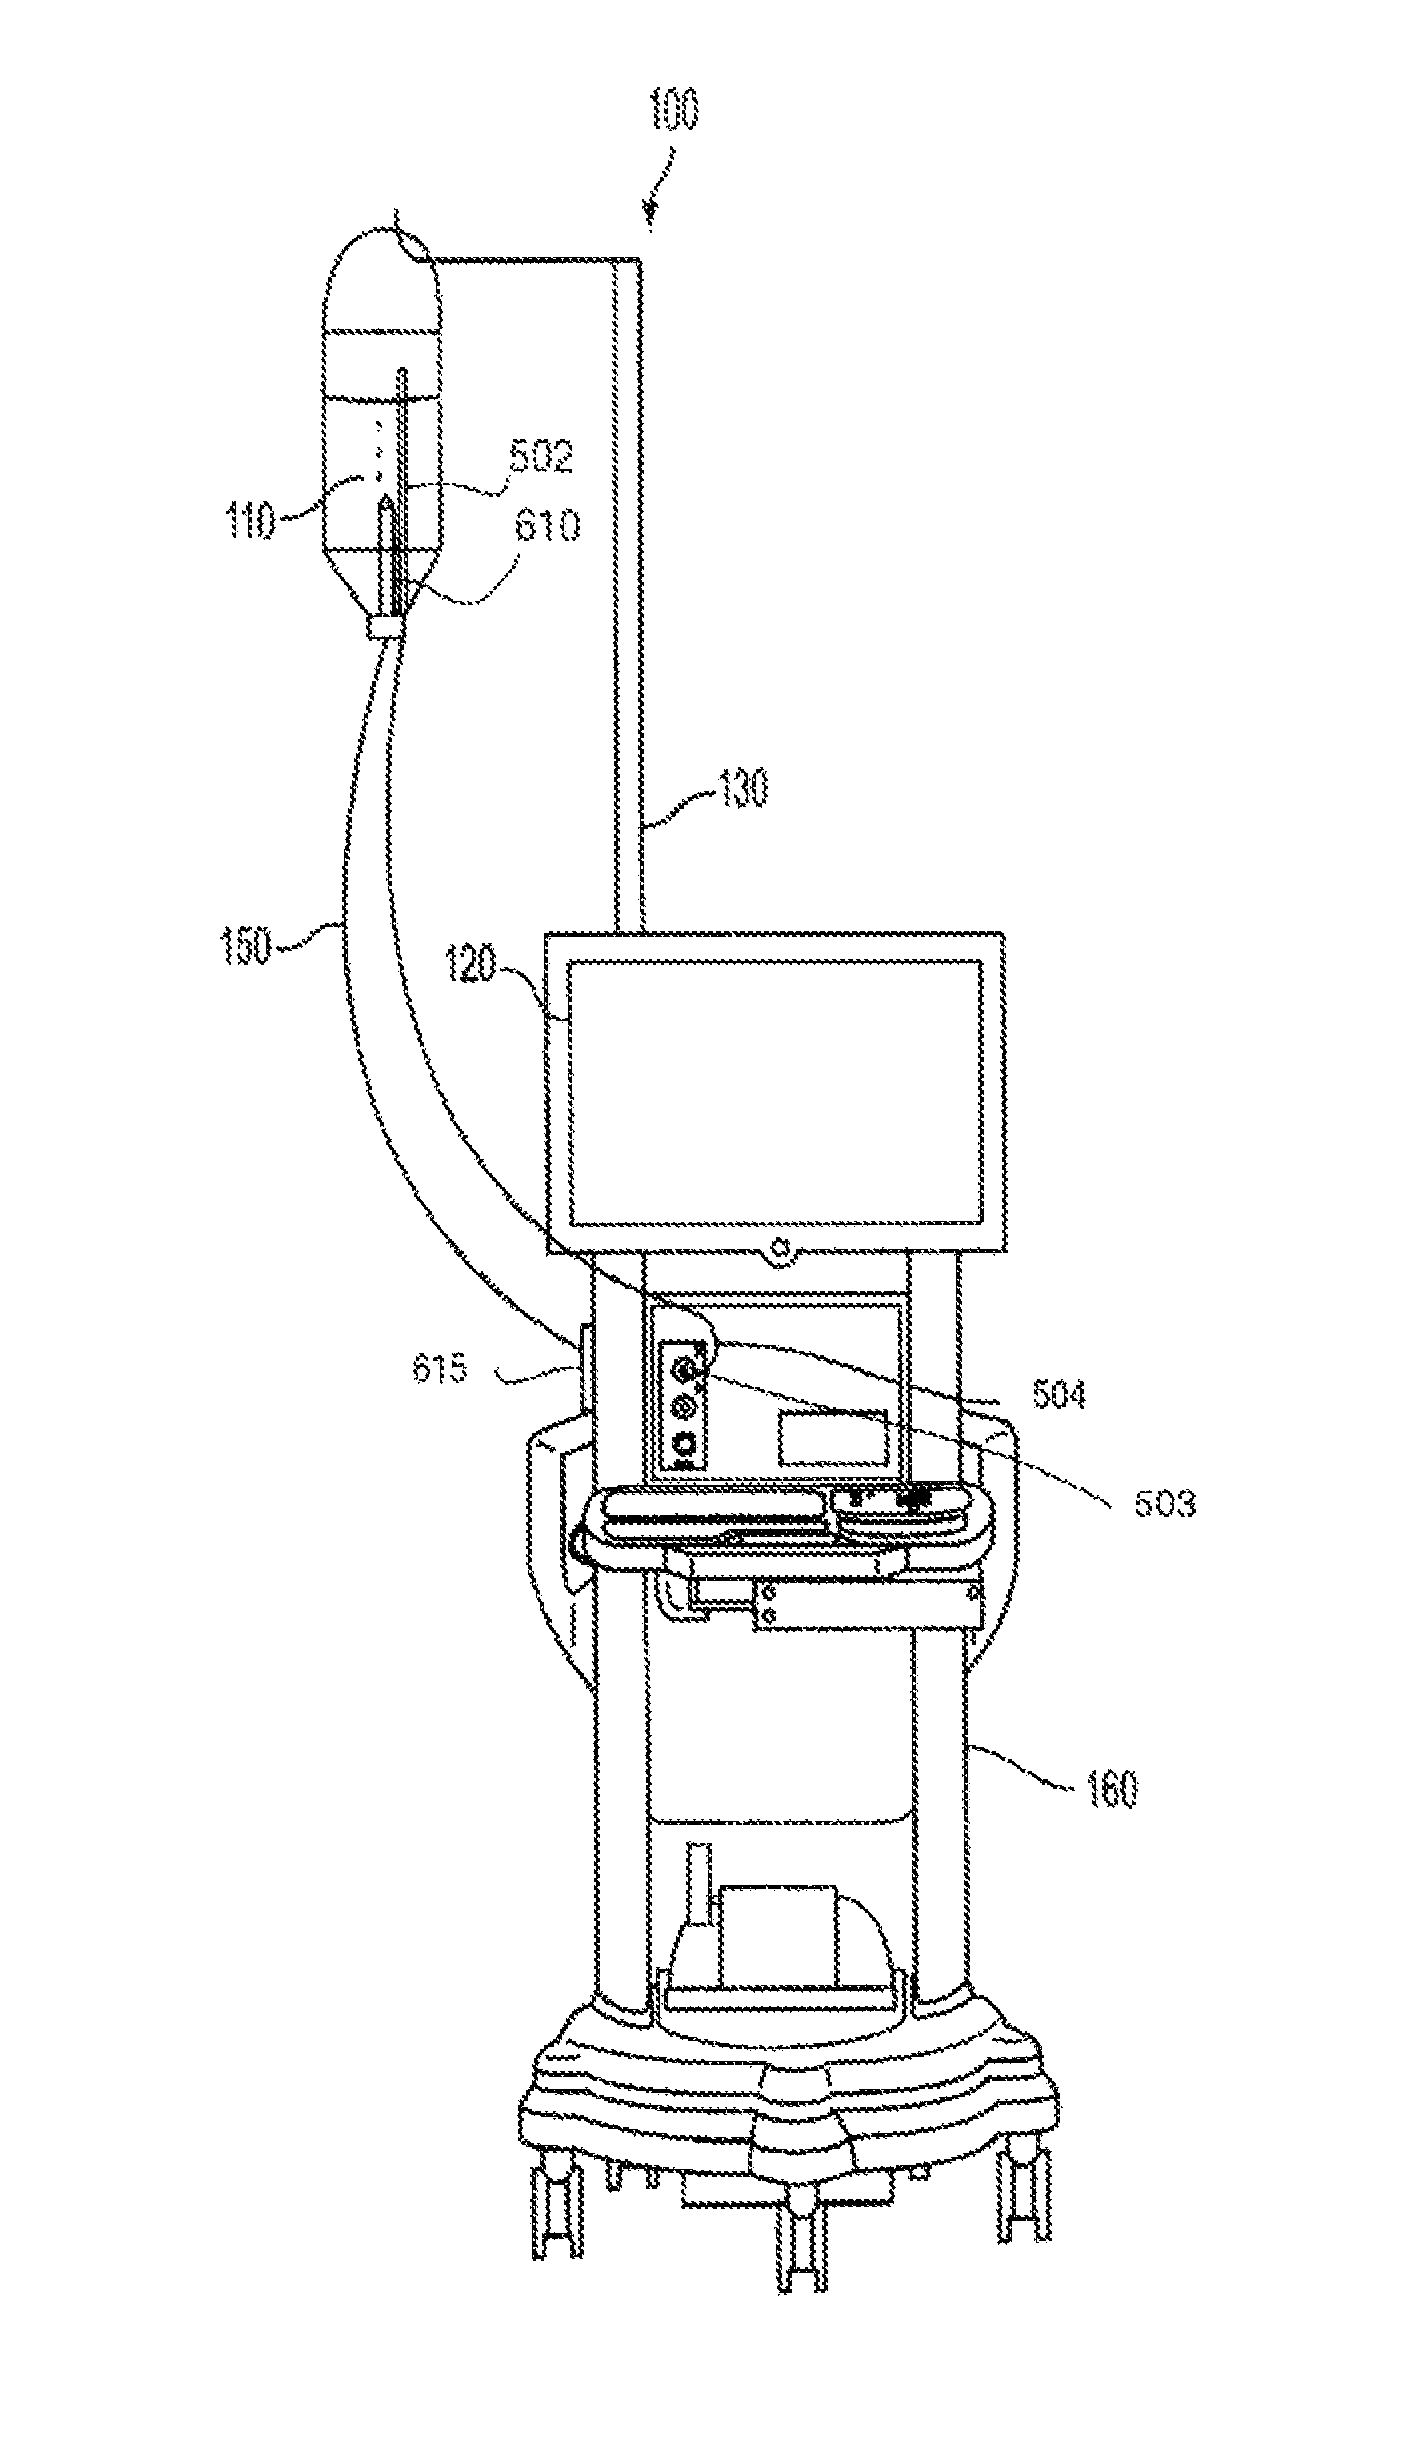 System and method for providing pressurized infusion